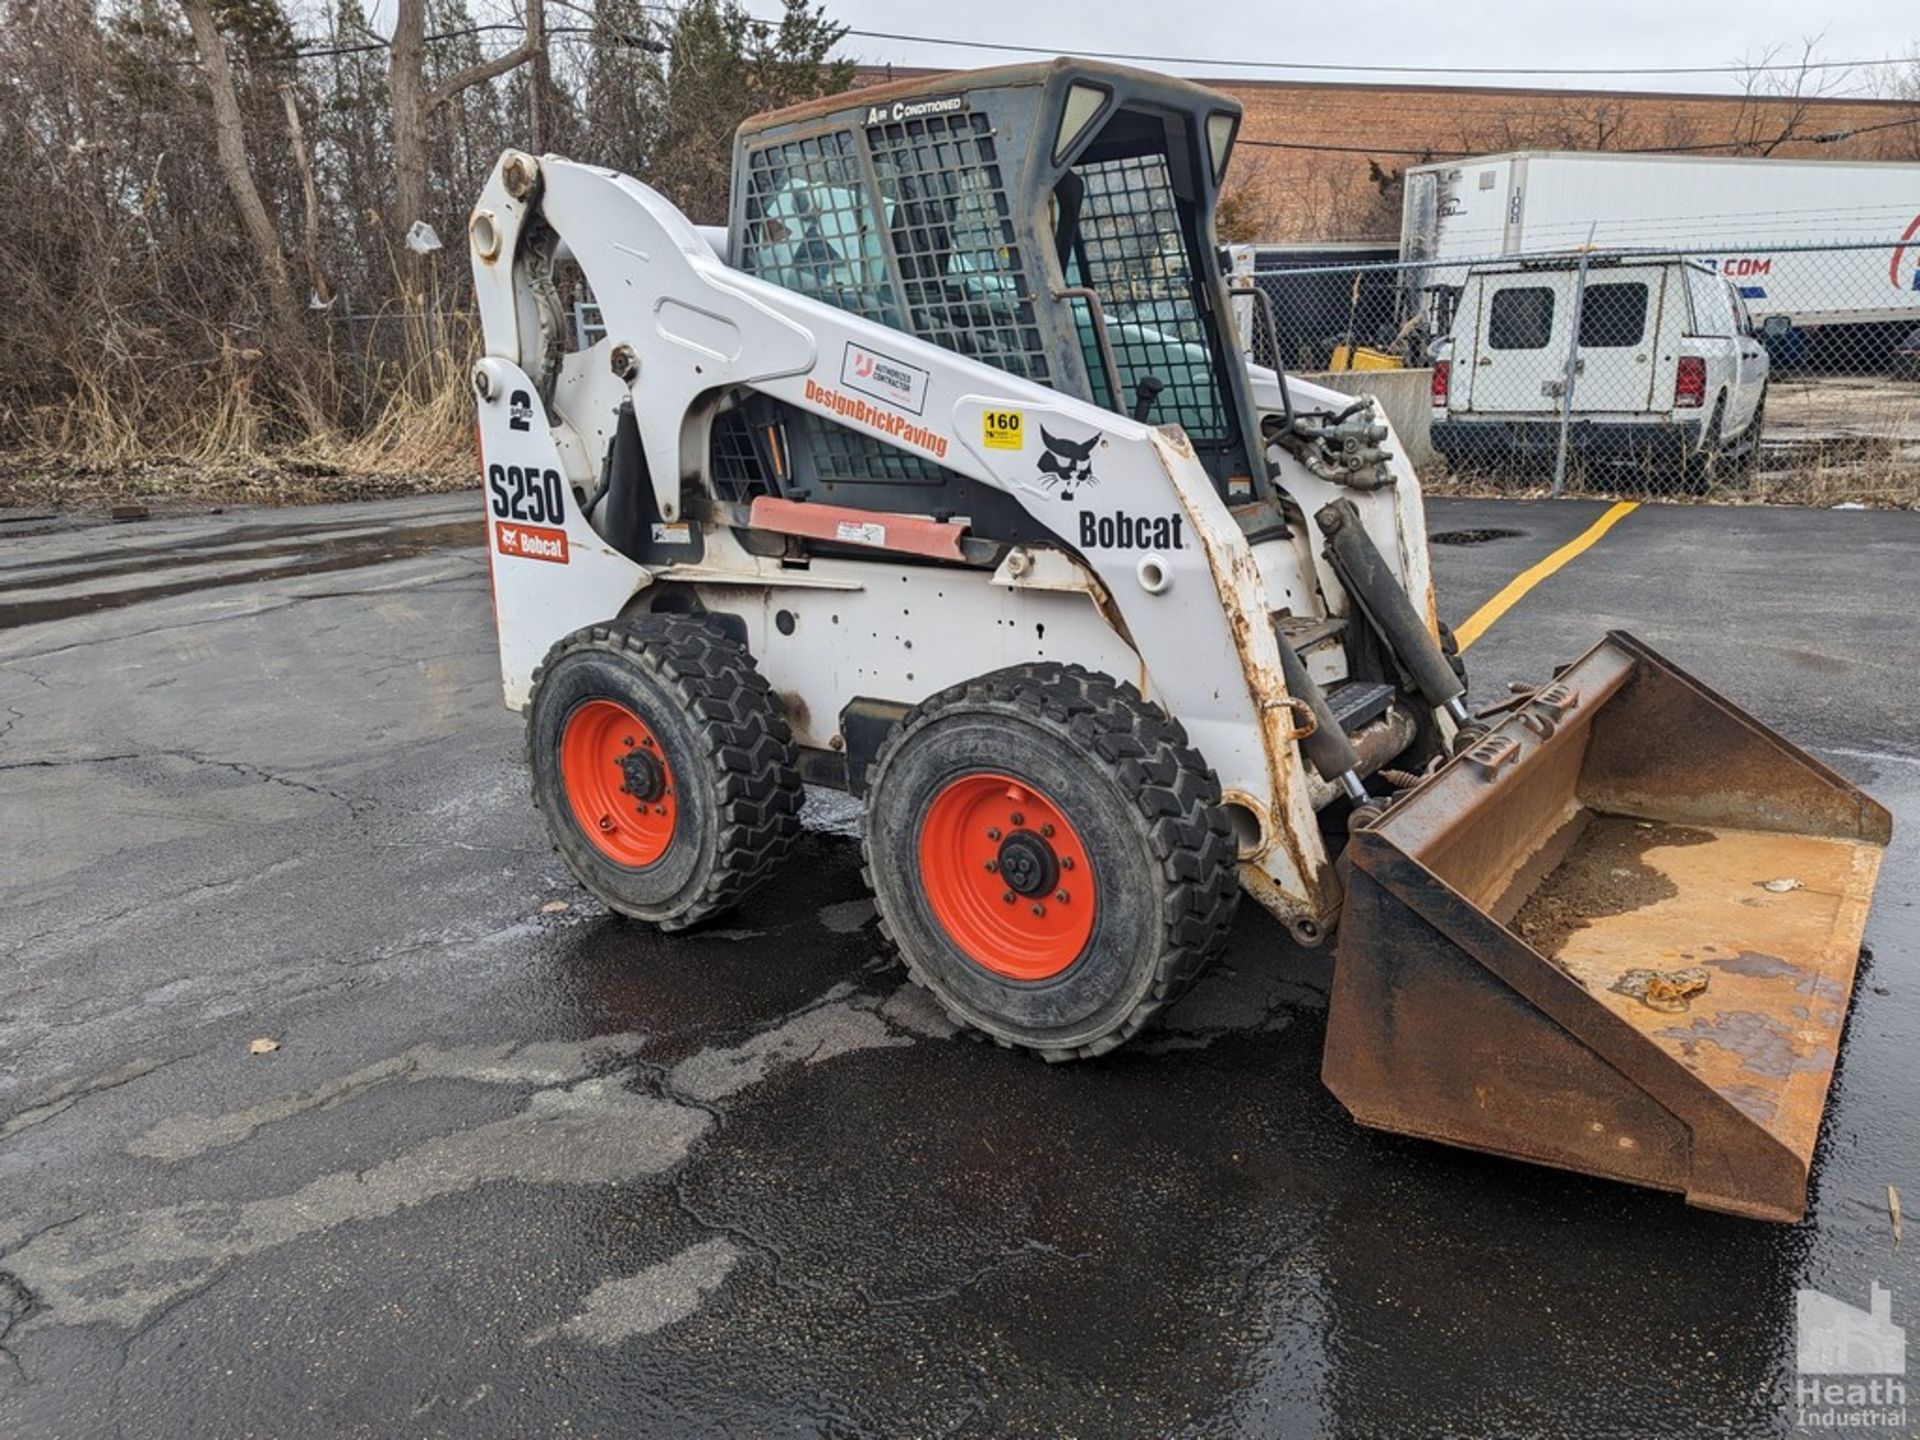 BOBCAT MODEL S250 SKID STEER LOADER, PIN 521316469, AUX HYDRAULICS, 2353 HOURS SHOWN ON METER